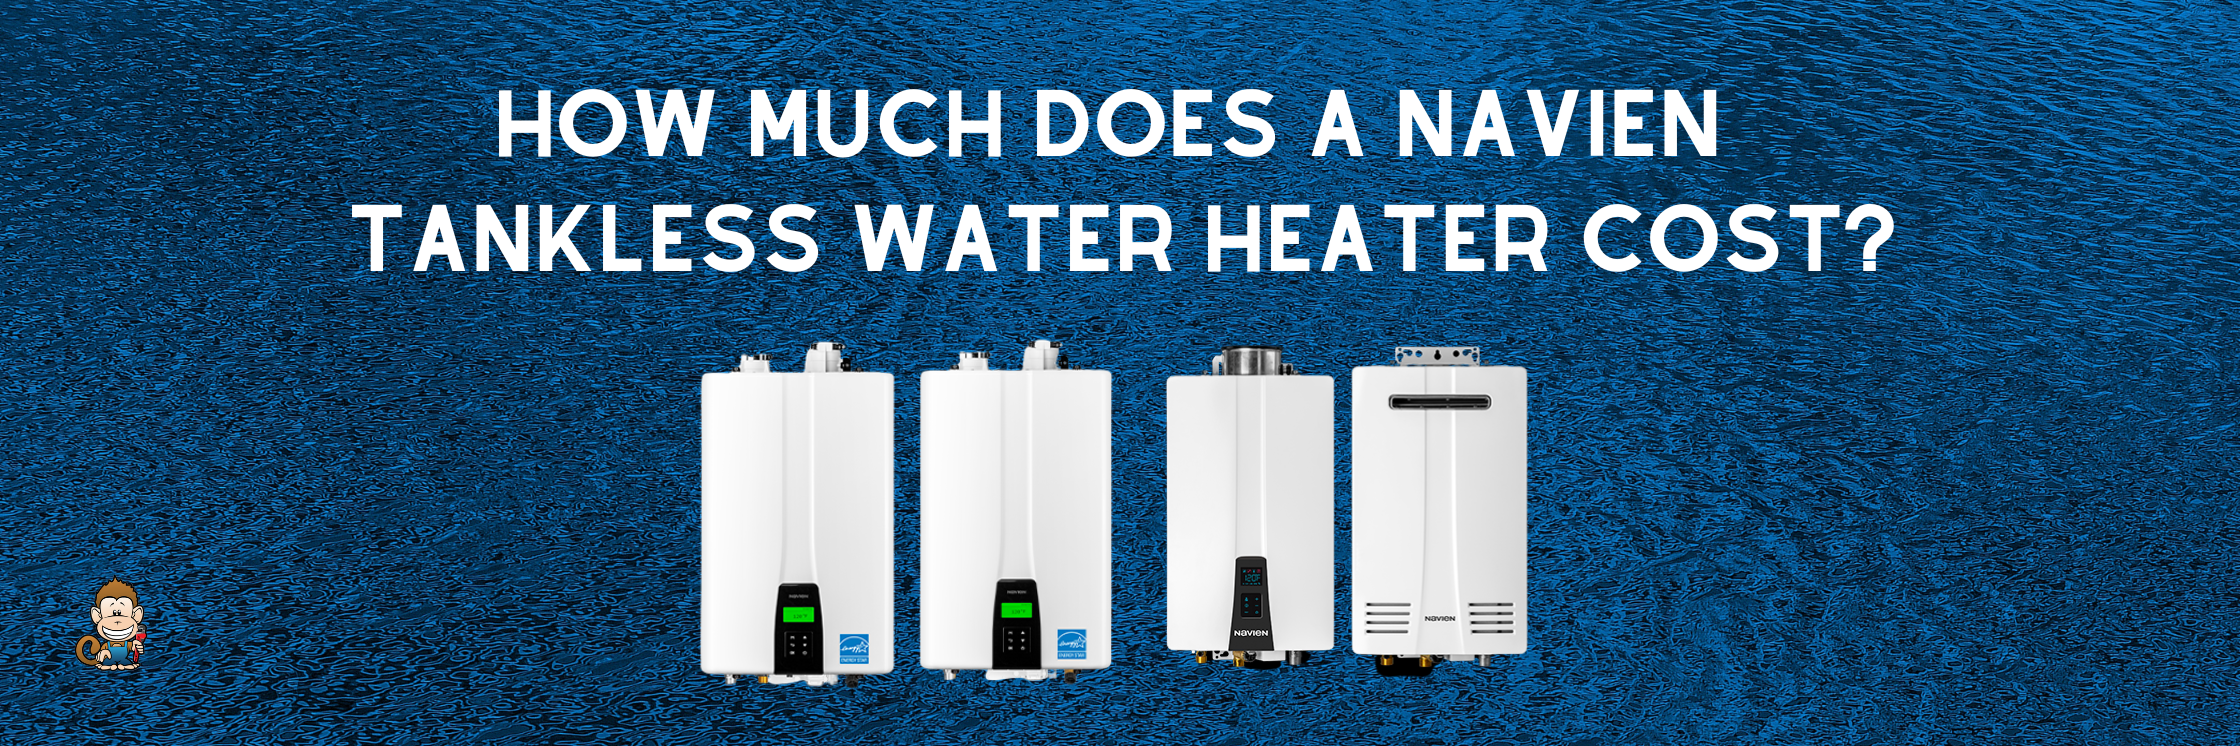 How Much Does a Navien Tankless Water Heater Cost? (Video)